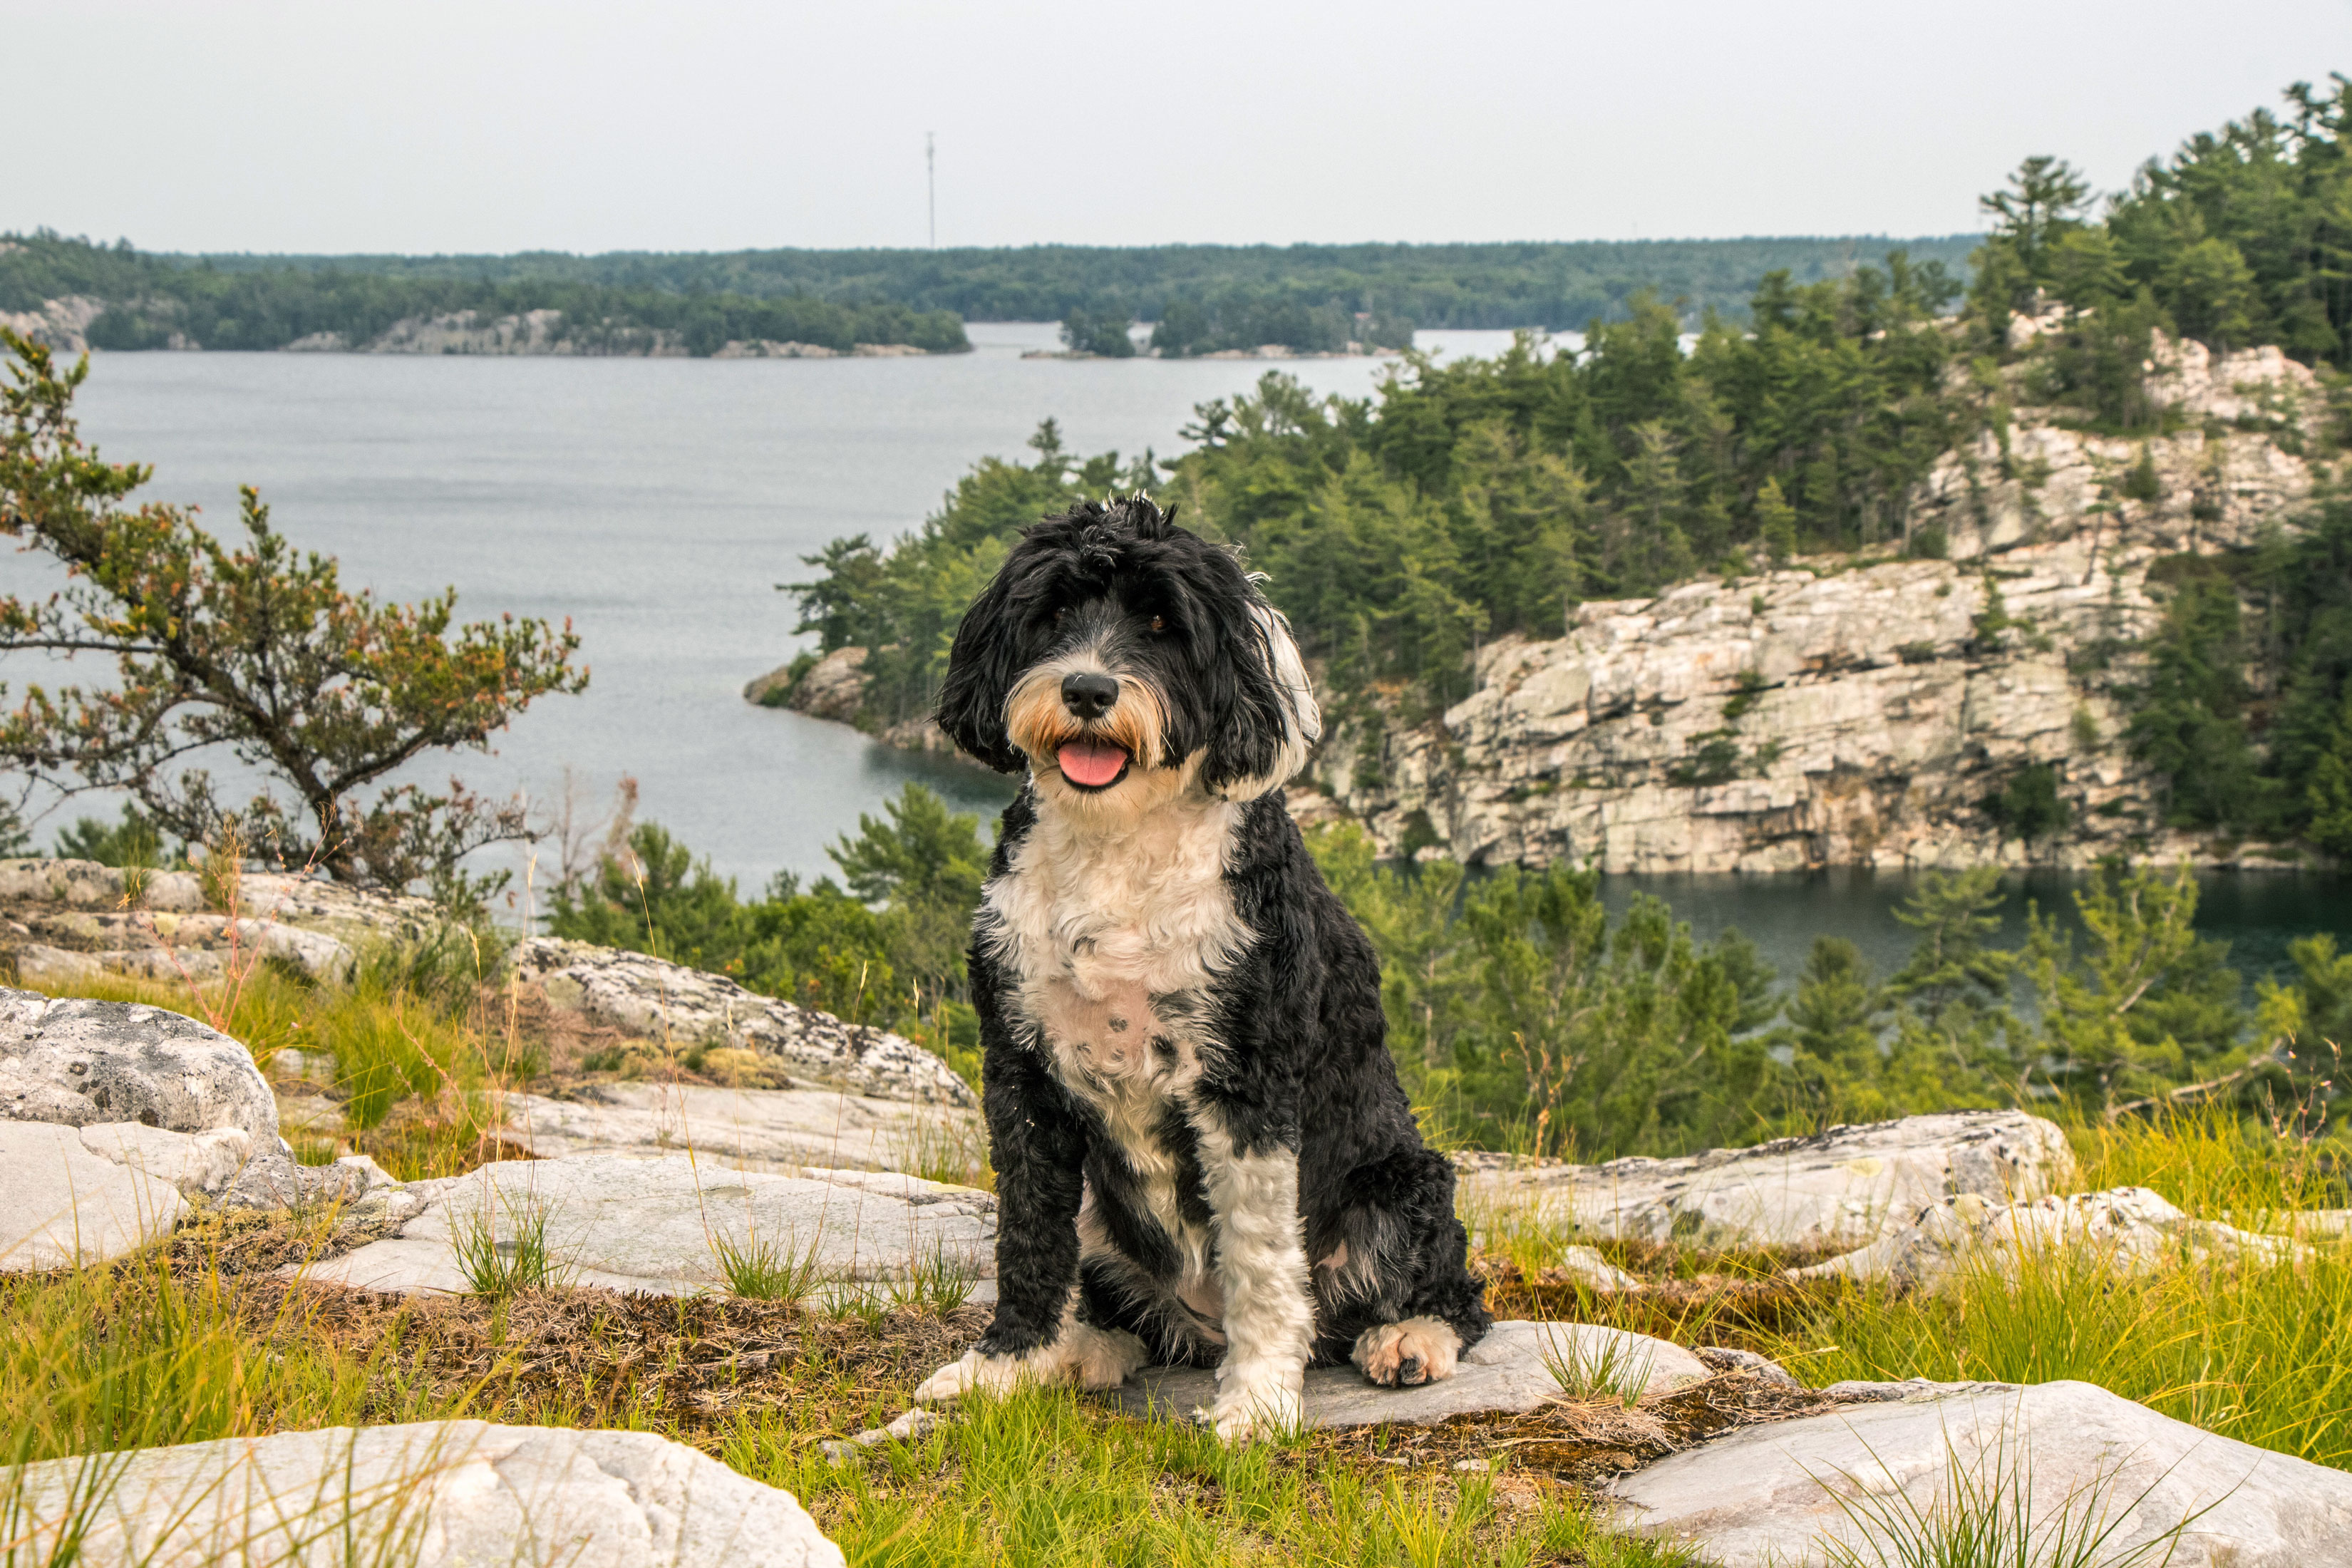 Portuguese Water dog at a lookout outdoors